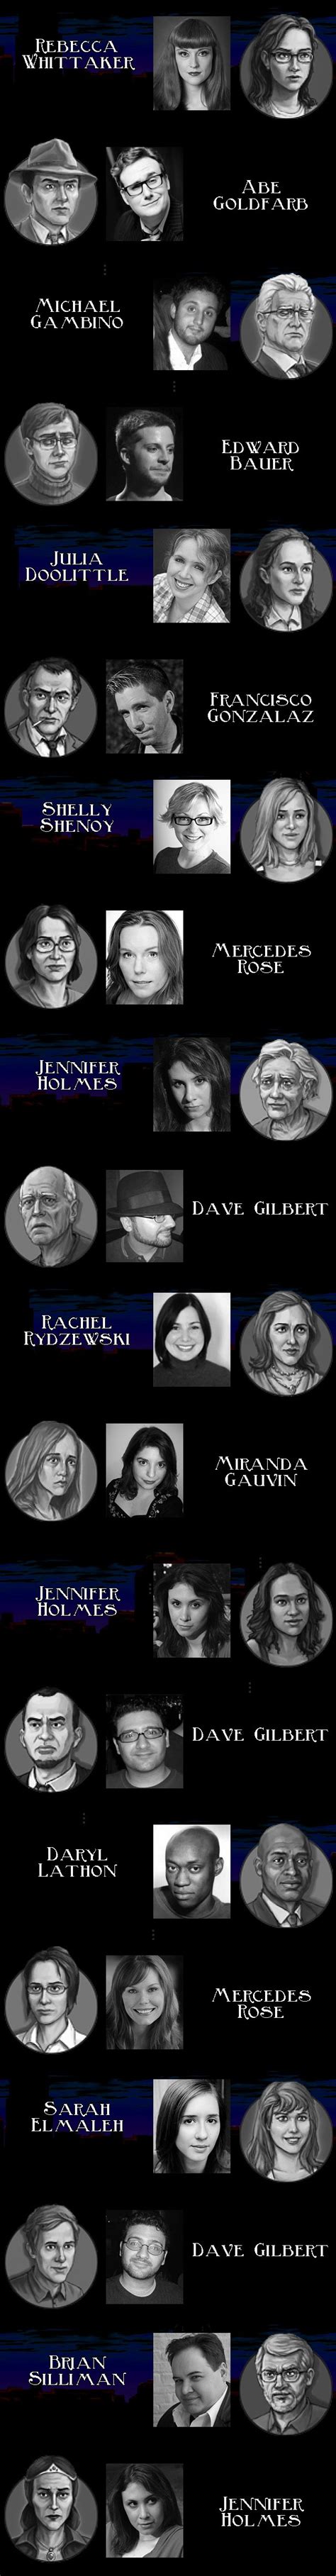 The Blackwell Deception Video Game Behind The Voice Actors